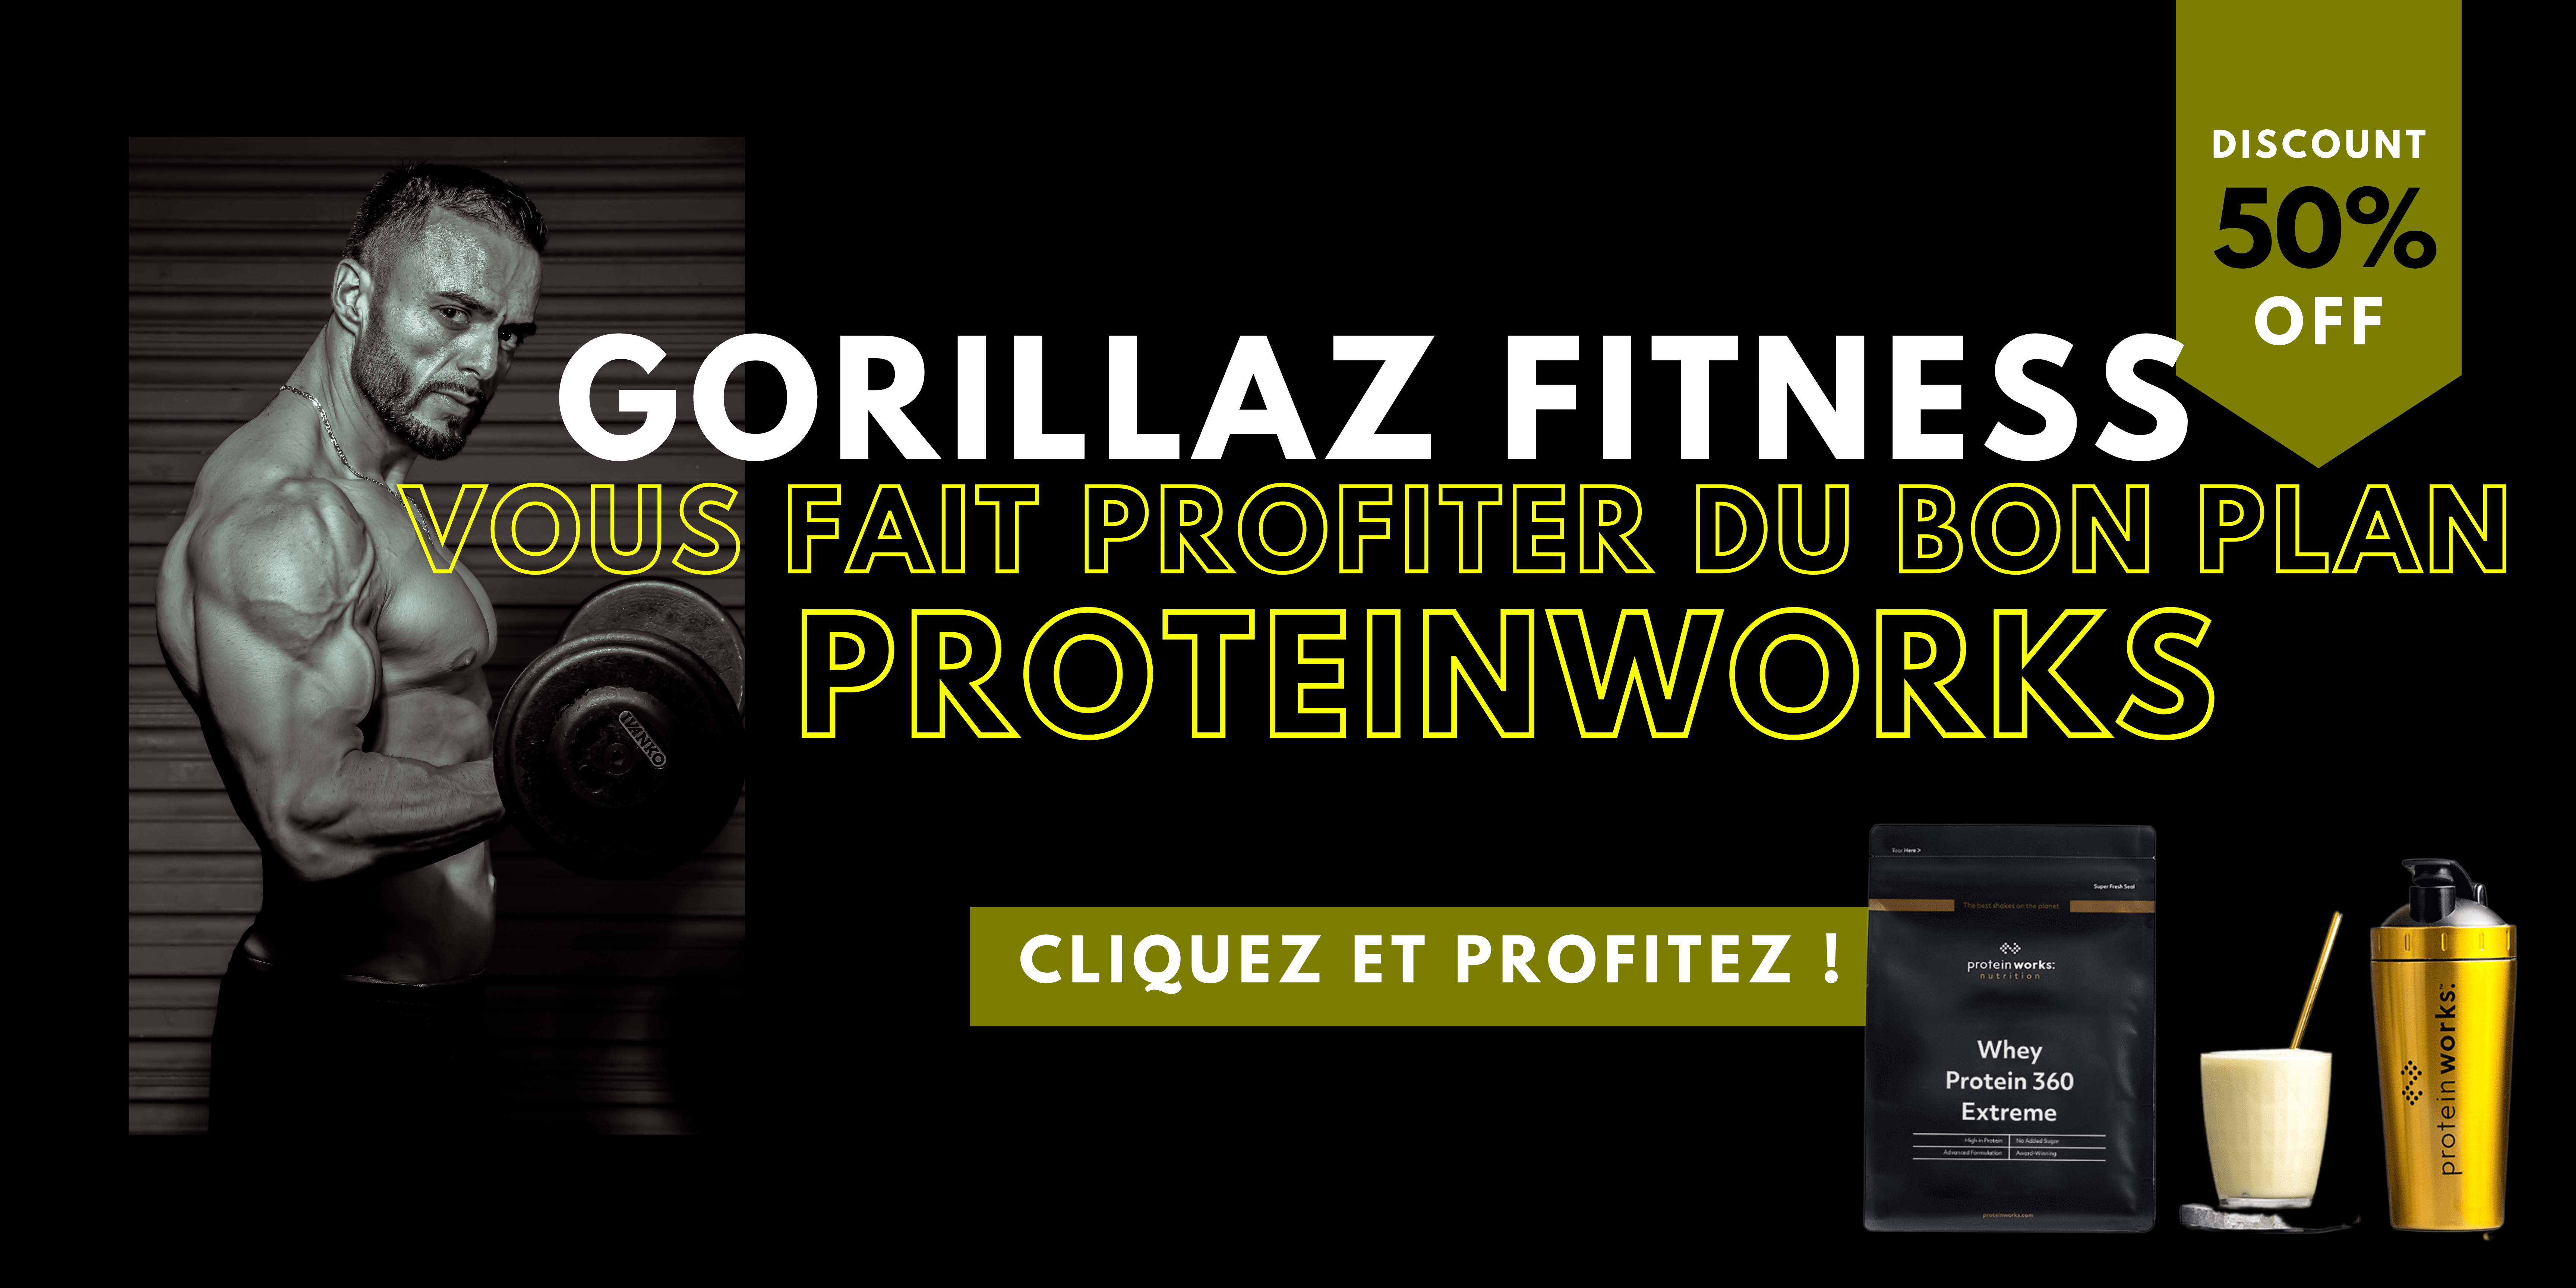 rewrite this title HIIT DÉBUTANT (cours complet en 20min) &#8211; Websérie FITNESS TRANSFORMATION by MYF (28/90)

 in french